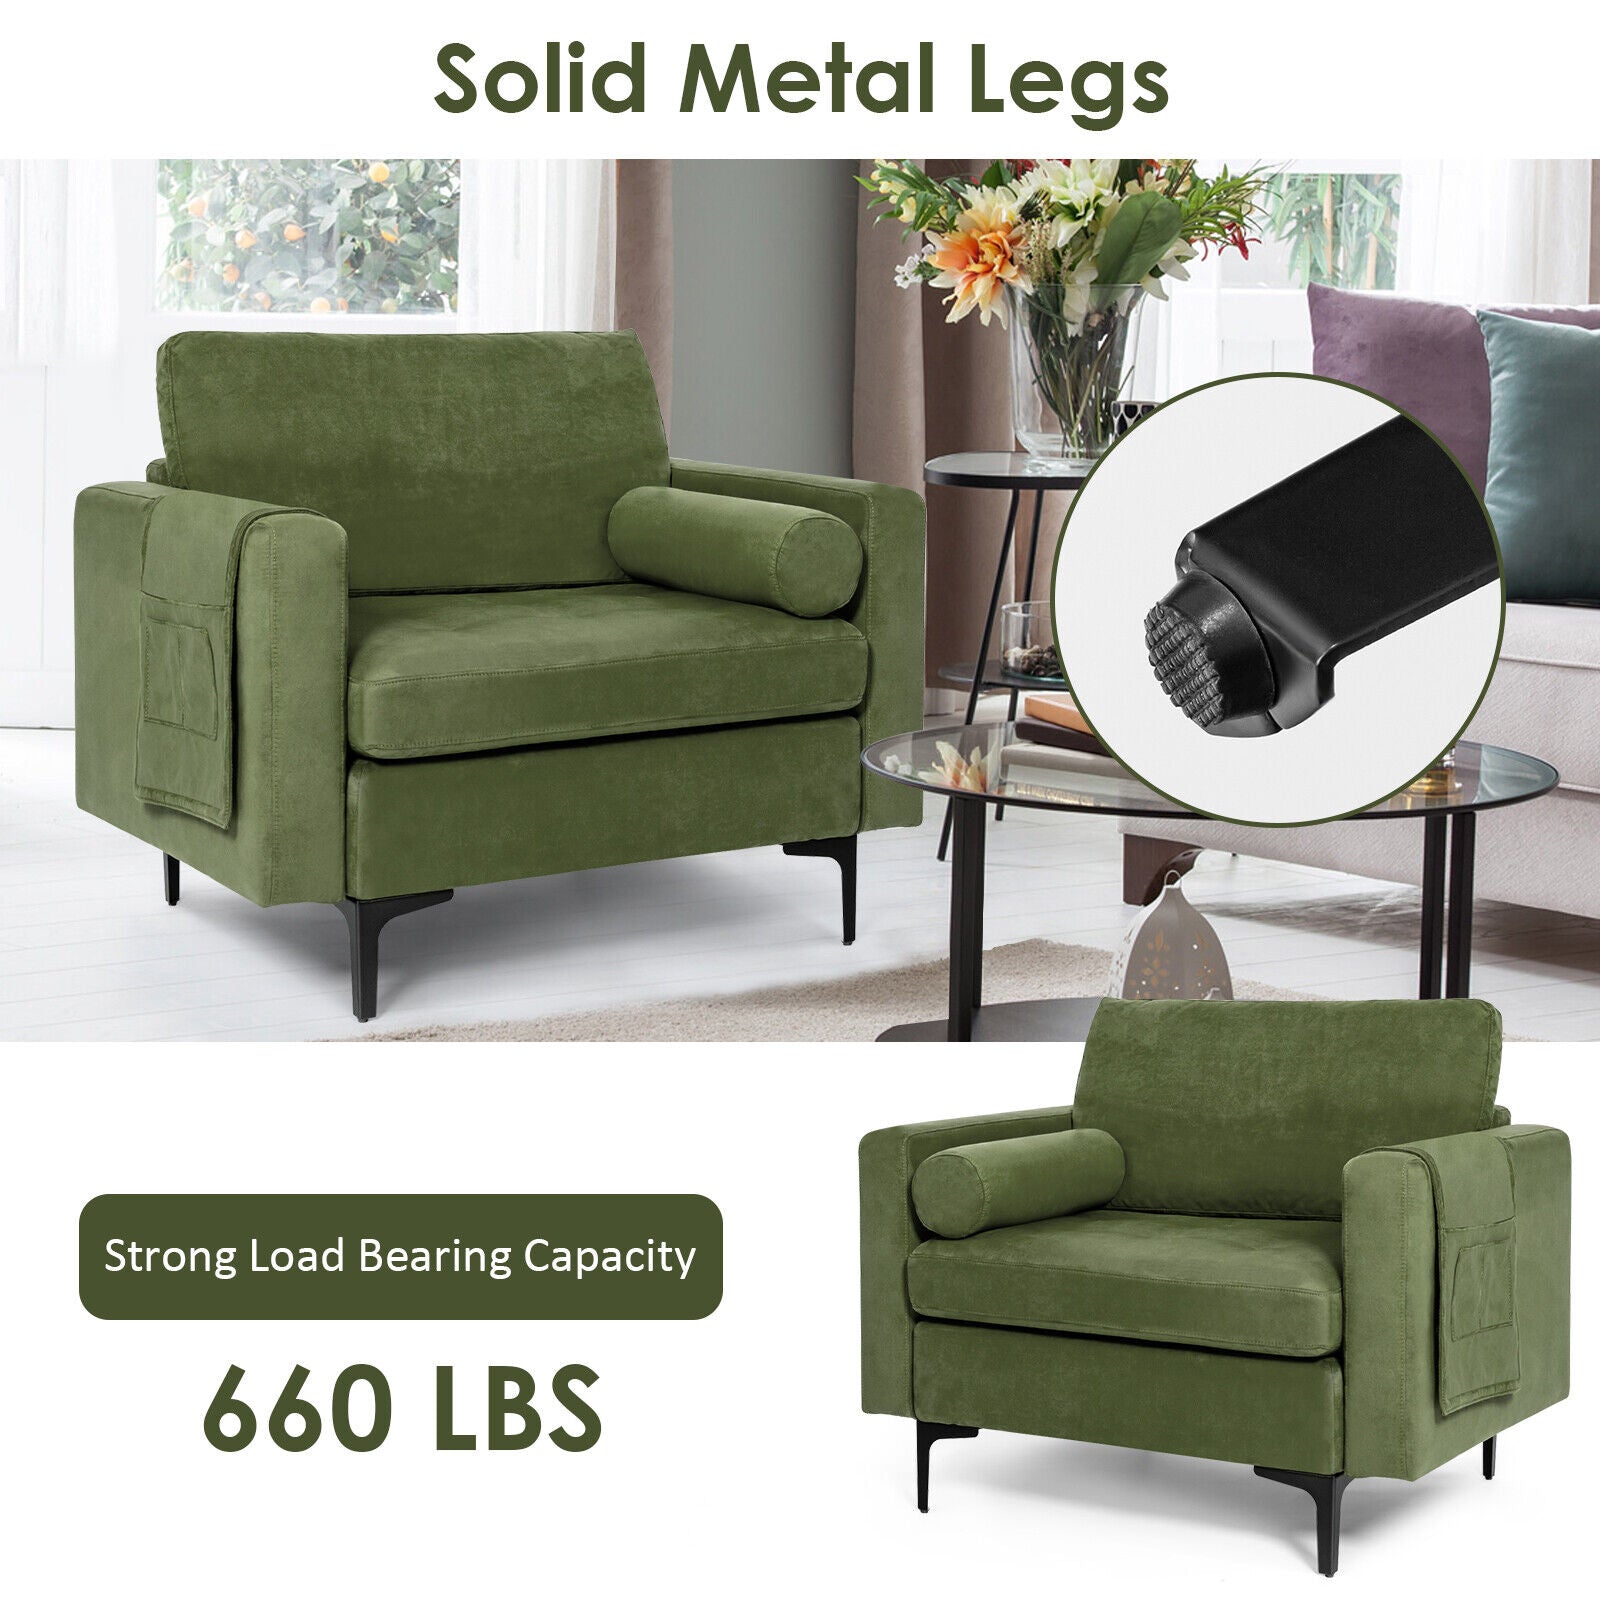 Solid and Stable Construction: Rest assured knowing our accent chair is built to last. The solid frame ensures exceptional load-bearing capacity, supporting weights of up to 660 lbs. Its sturdy metal legs provide stability and prevent wobbling or collapsing, while the anti-slip foot pads protect your floors from scratches.